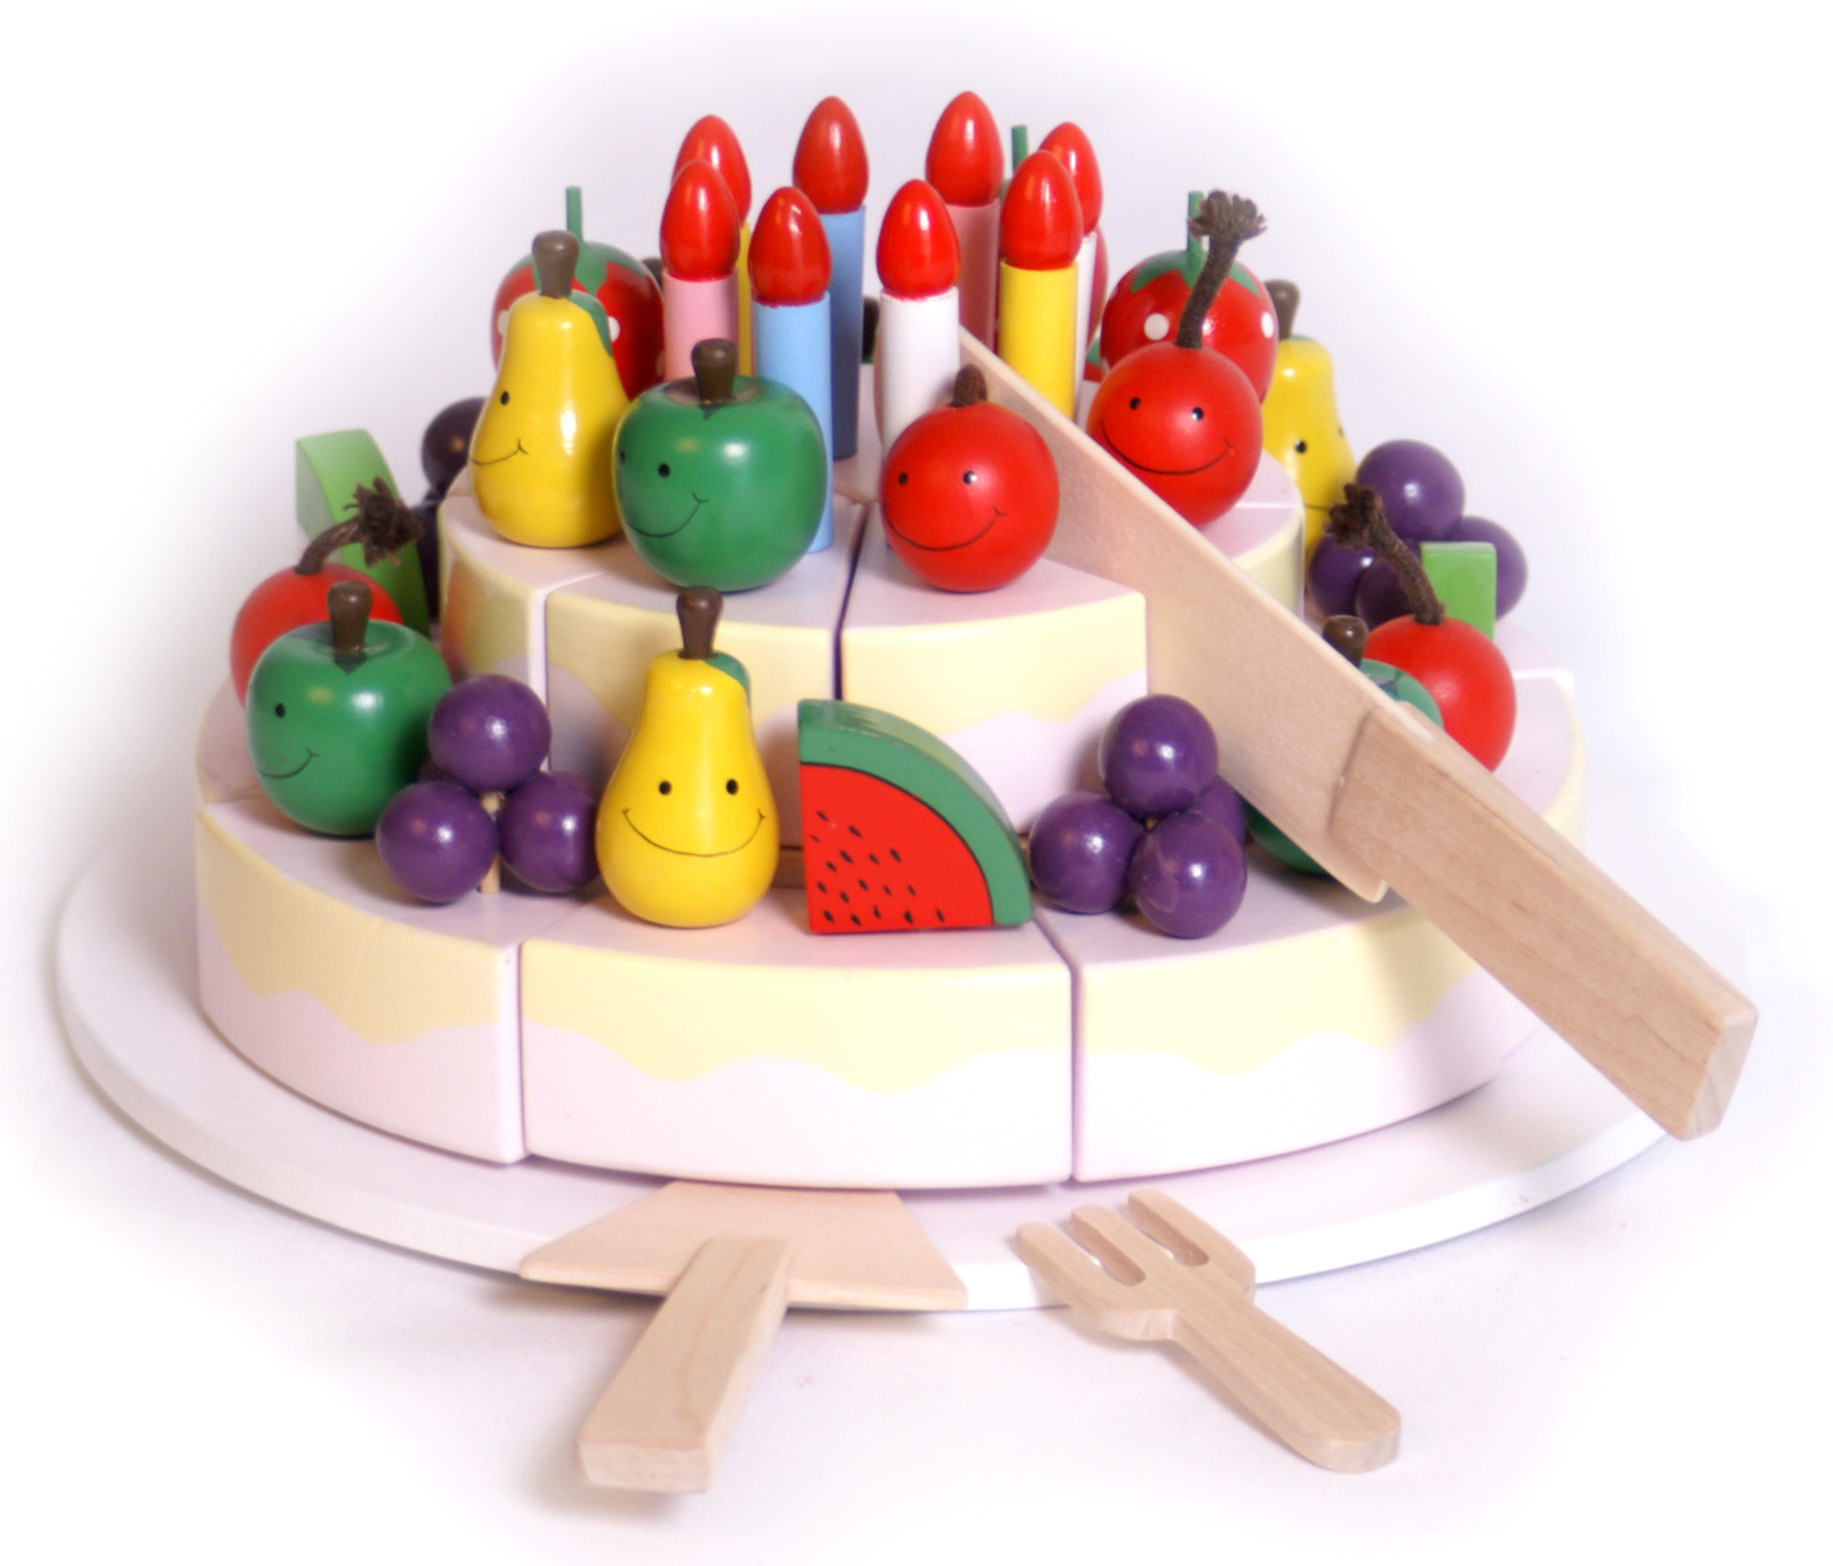 Birthday Cake Toy
 Wooden Happy Birthday cake toy with platter Knife Fork and